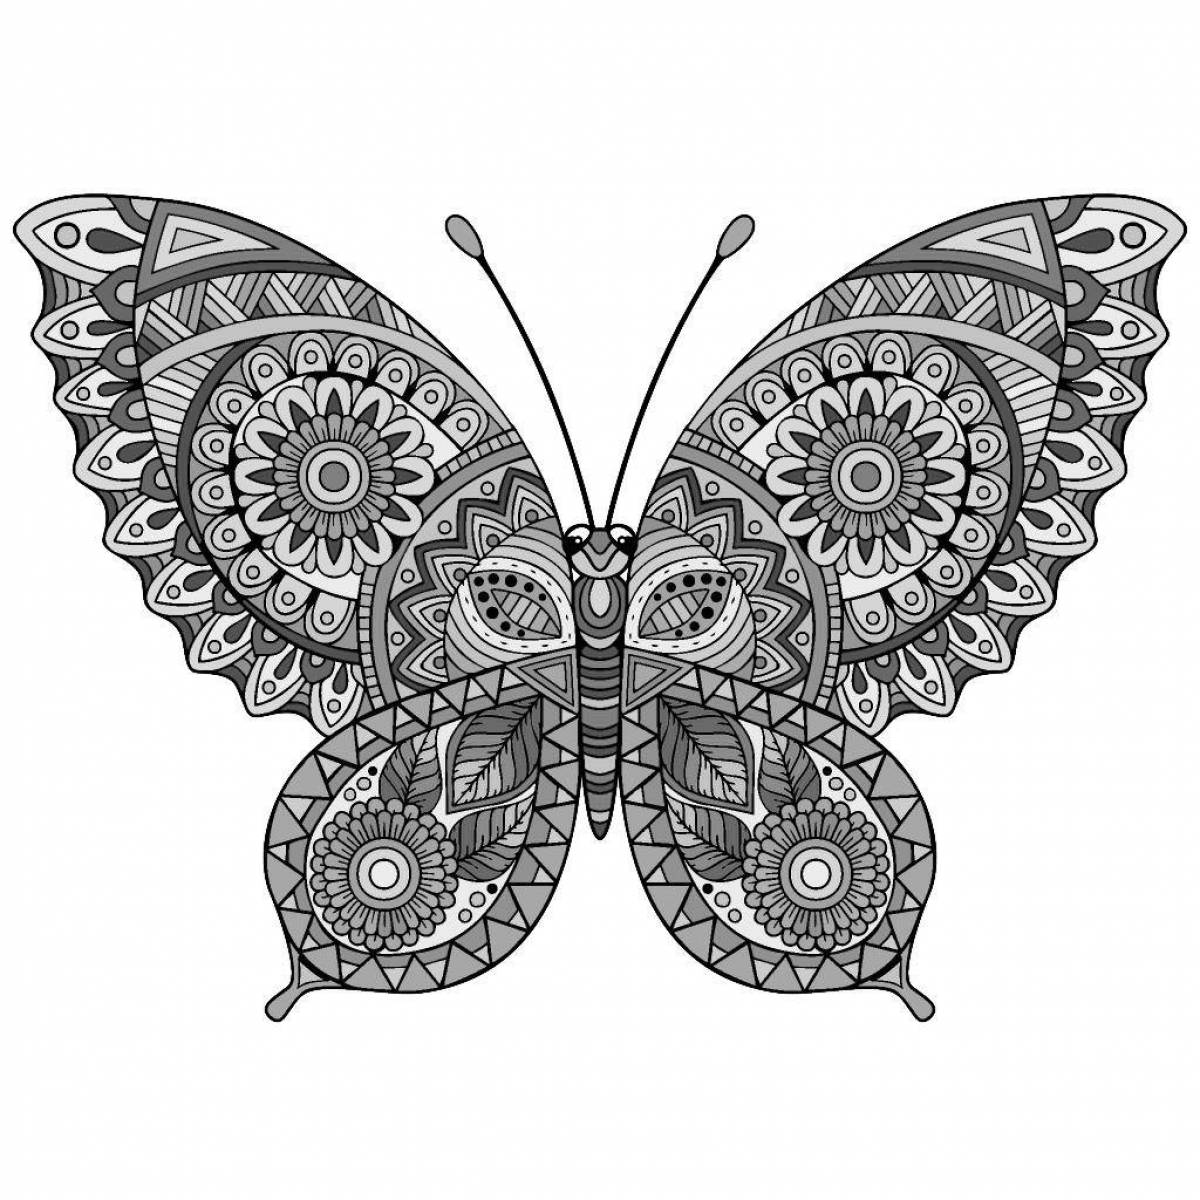 Coloring book luminous anti-stress butterfly